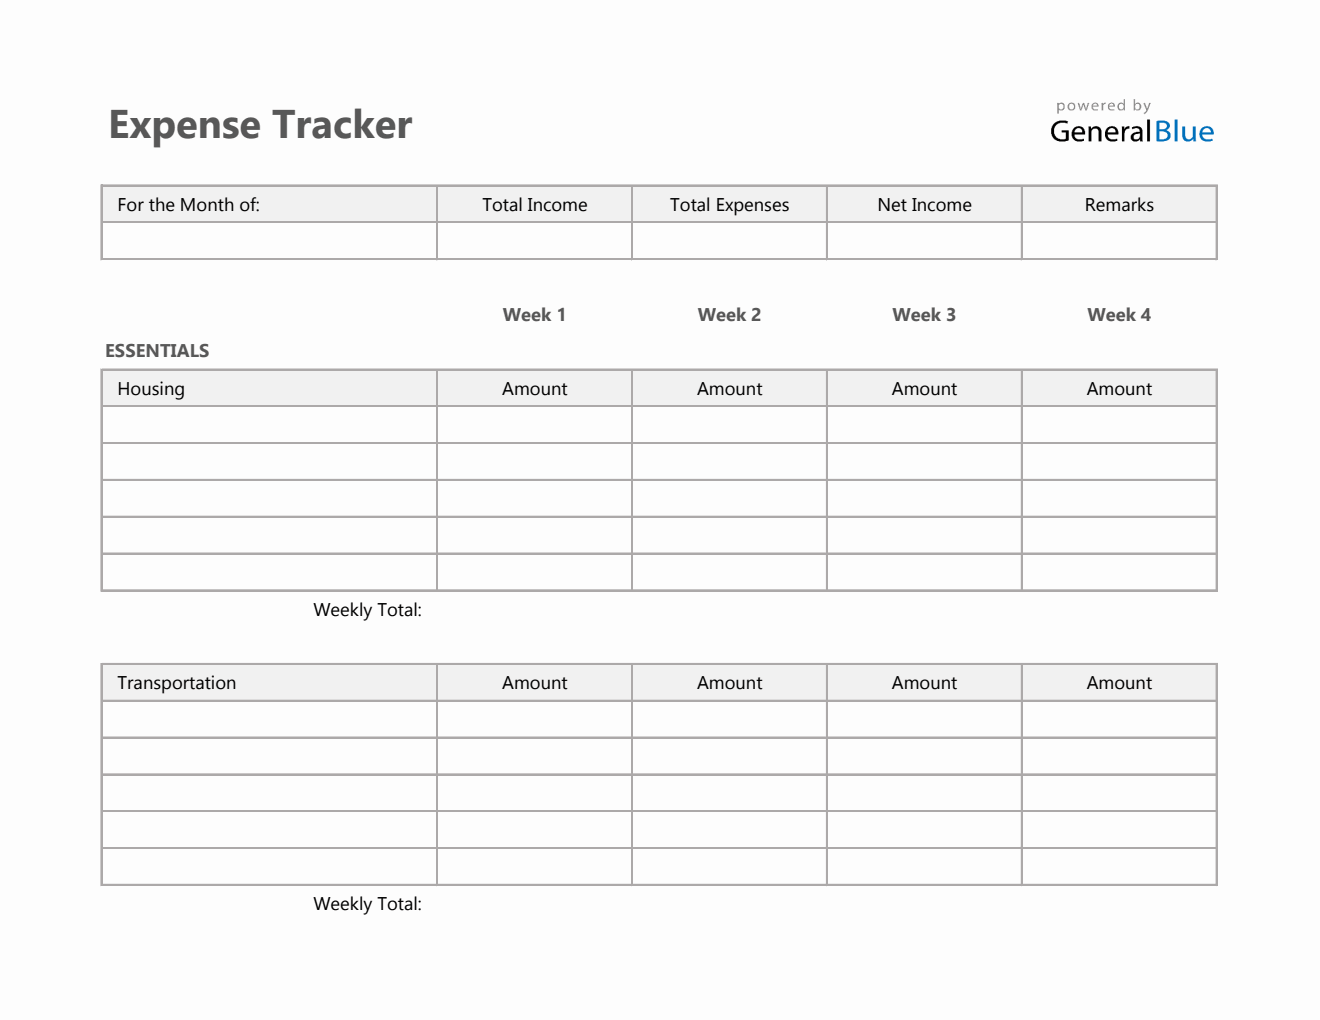 Expense Tracker by Category in Excel (Simple)